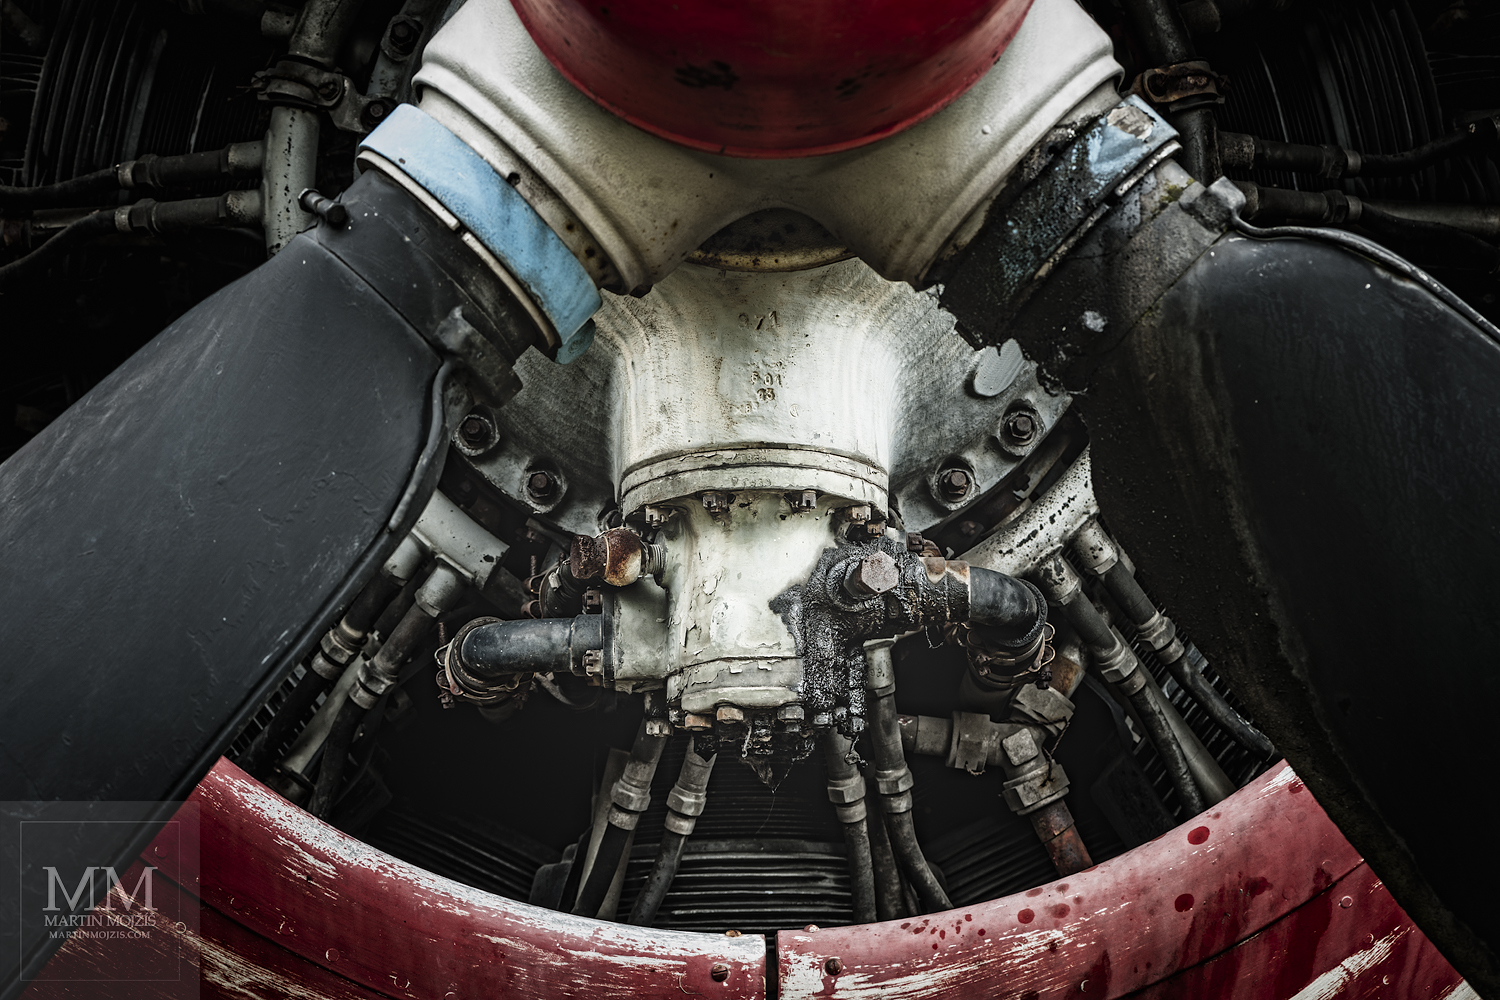 Part of the engine of the airliner. Photograph with title PART OF THE HEART.